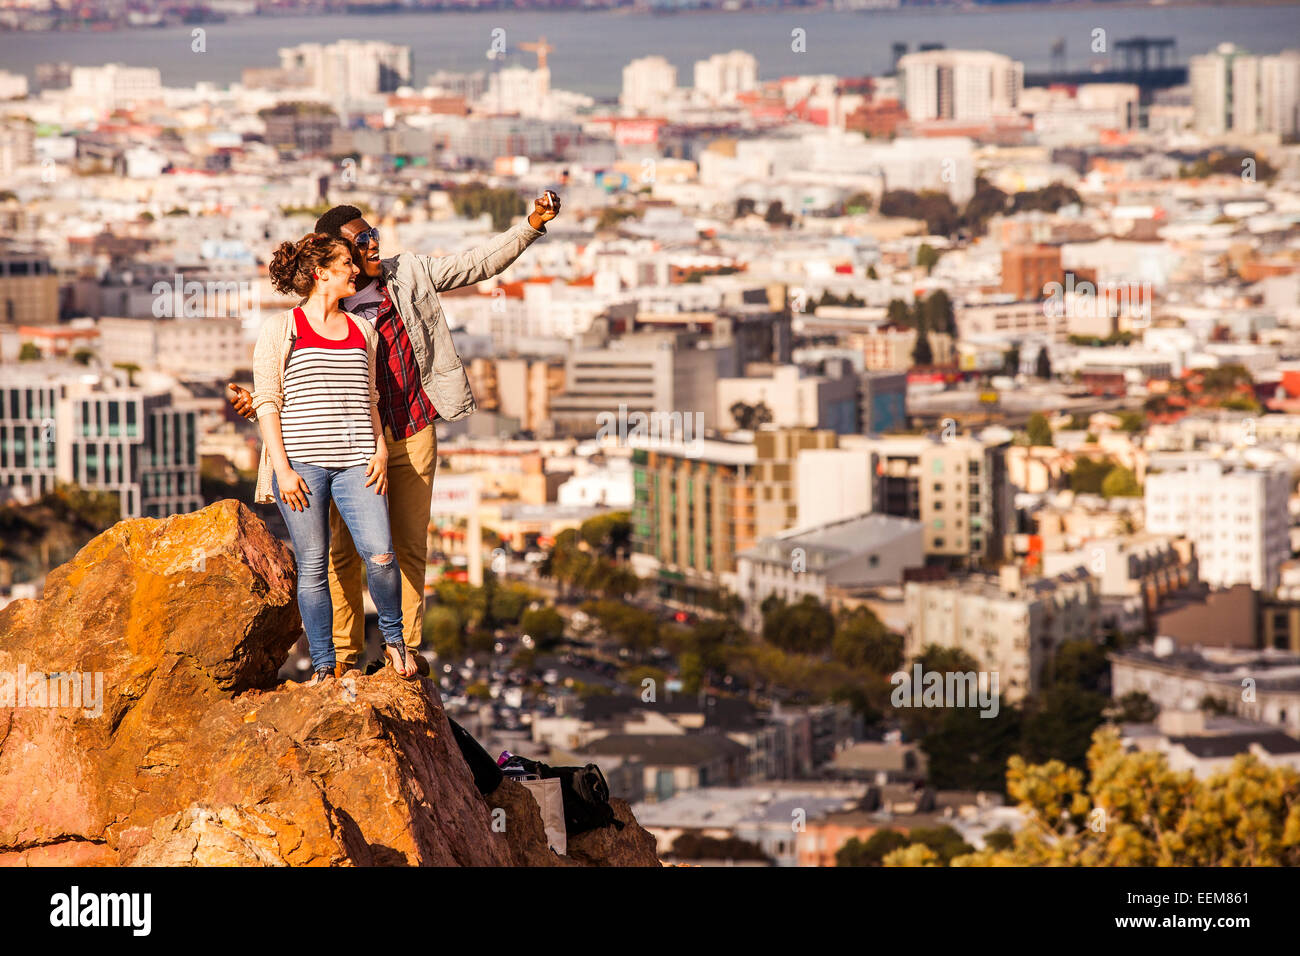 Couple taking cell phone selfie on rock overlooking scenic view of cityscape Stock Photo